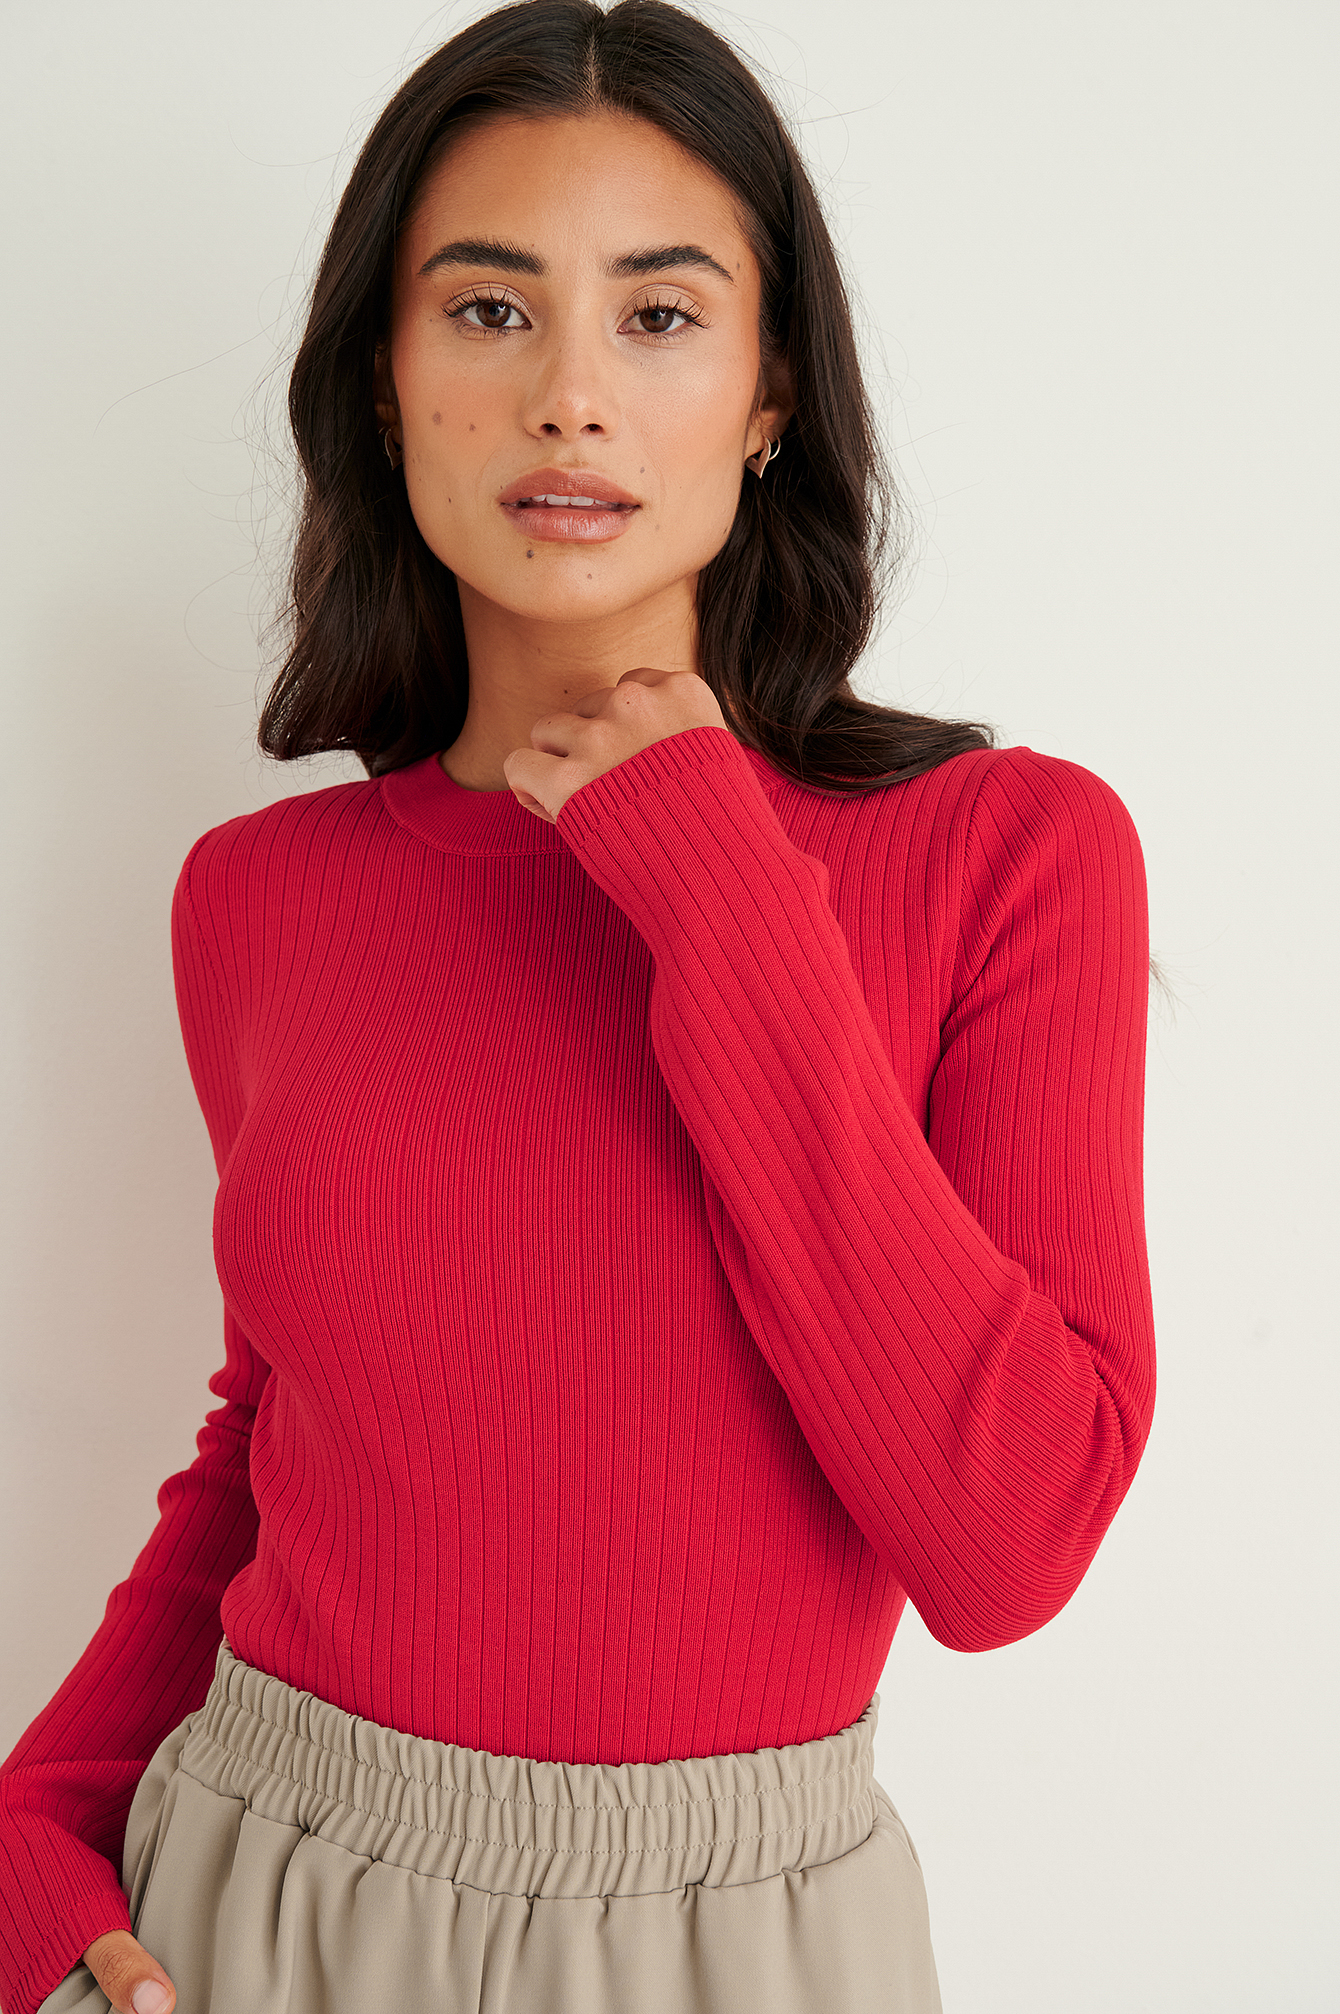 Bright Red Cross Back Knitted Top